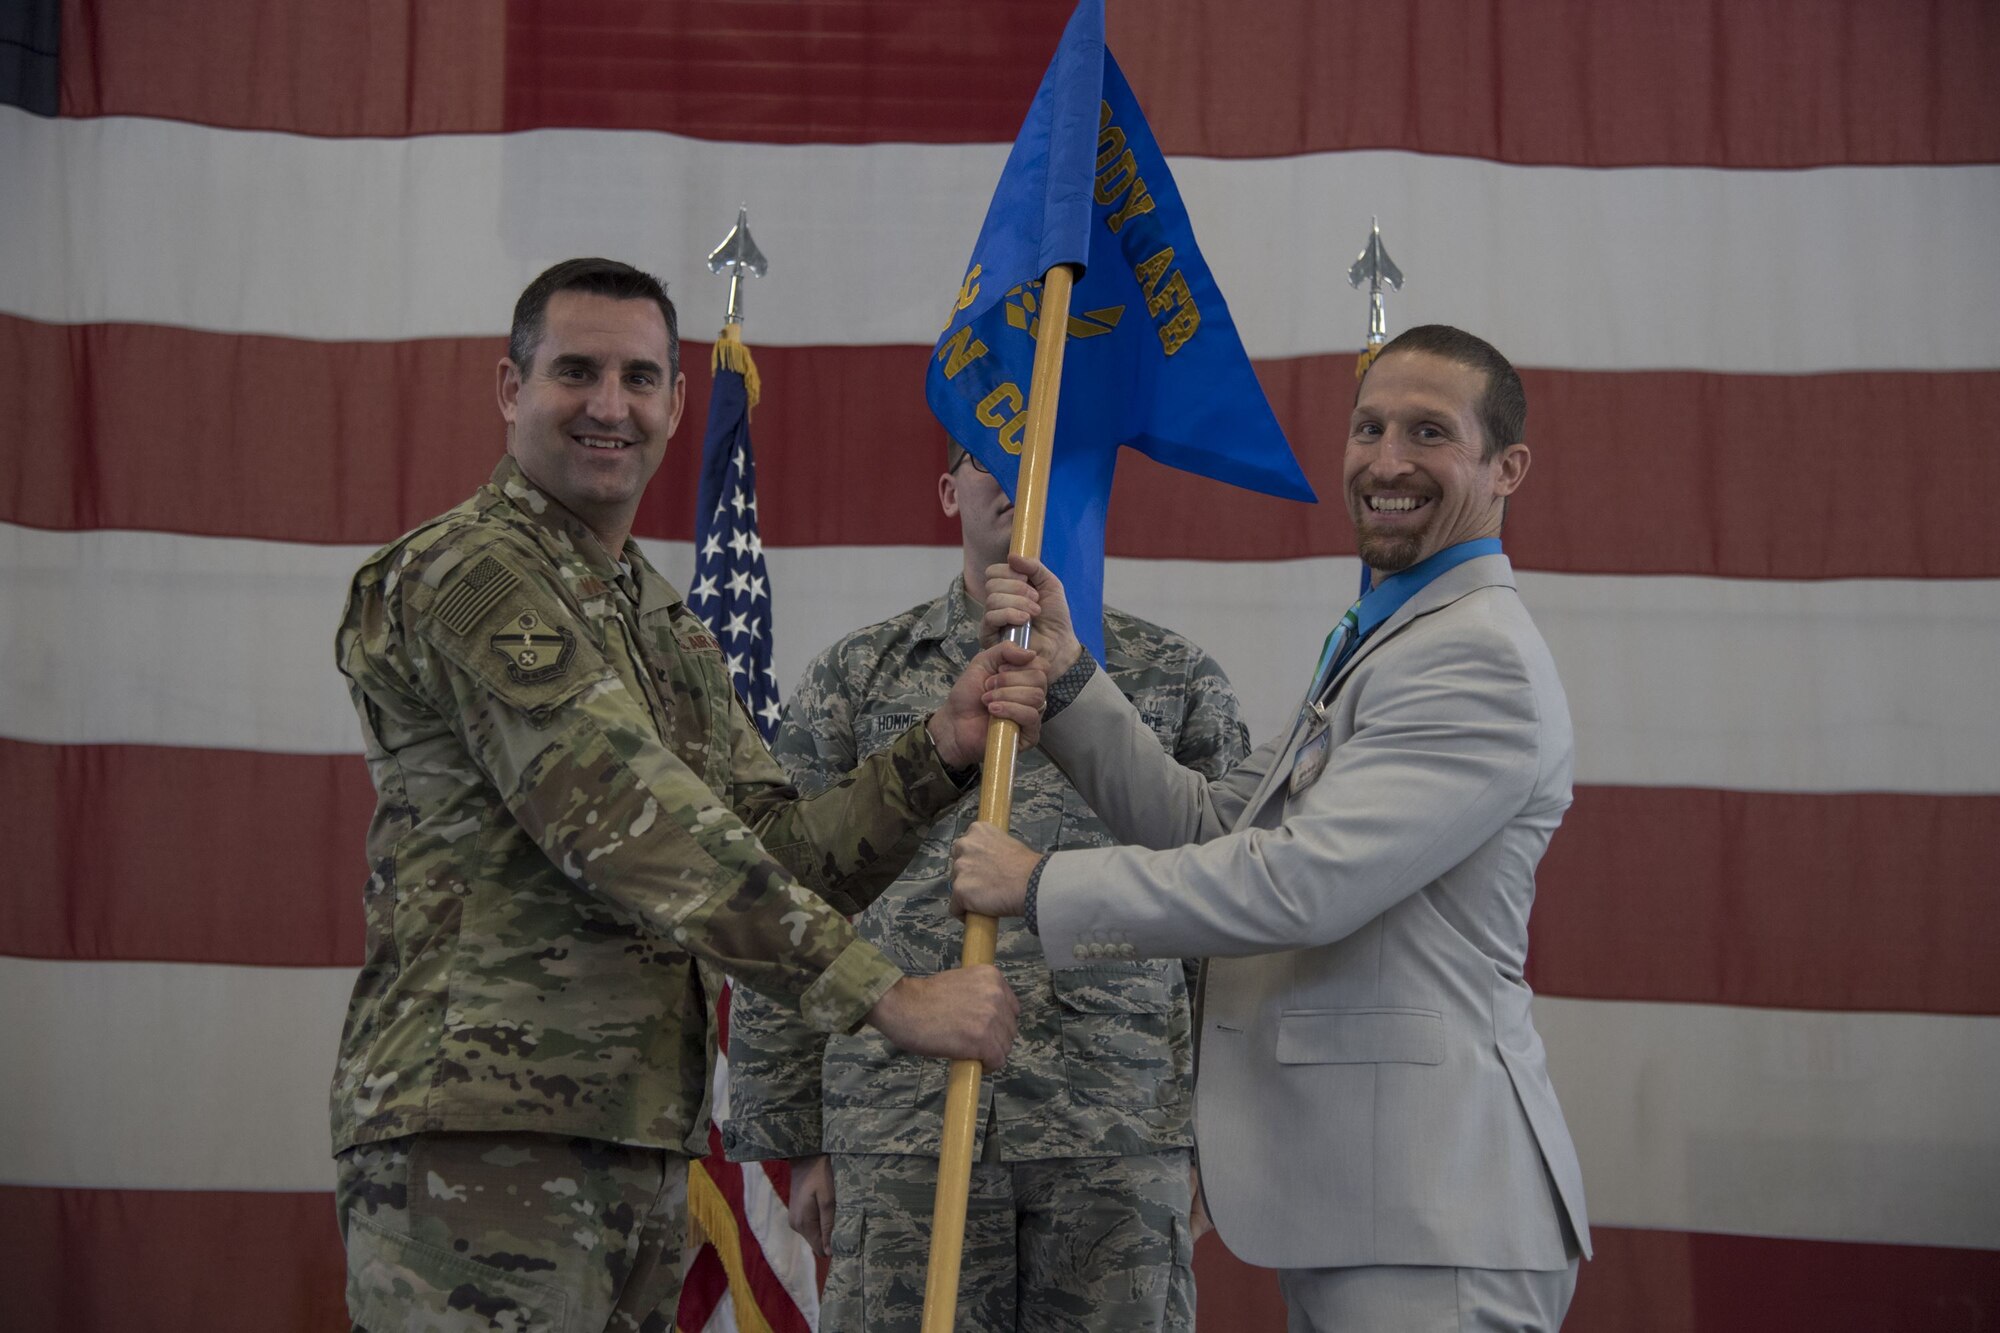 Col. Jeffrey Valenzia, 93d Air Ground Operations Wing commander, hands the guidon to Kelly Barcol, incoming 93d AGOW honorary commander, during an Honorary Commander Change of Command ceremony at Moody Air Force Base, Ga., Jan. 26, 2018. The Honorary Commander Program allows local community leaders to gain awareness of Moody’s mission through official and social functions. (U.S. Air Force Photo by Staff Sgt. Olivia Dominique)